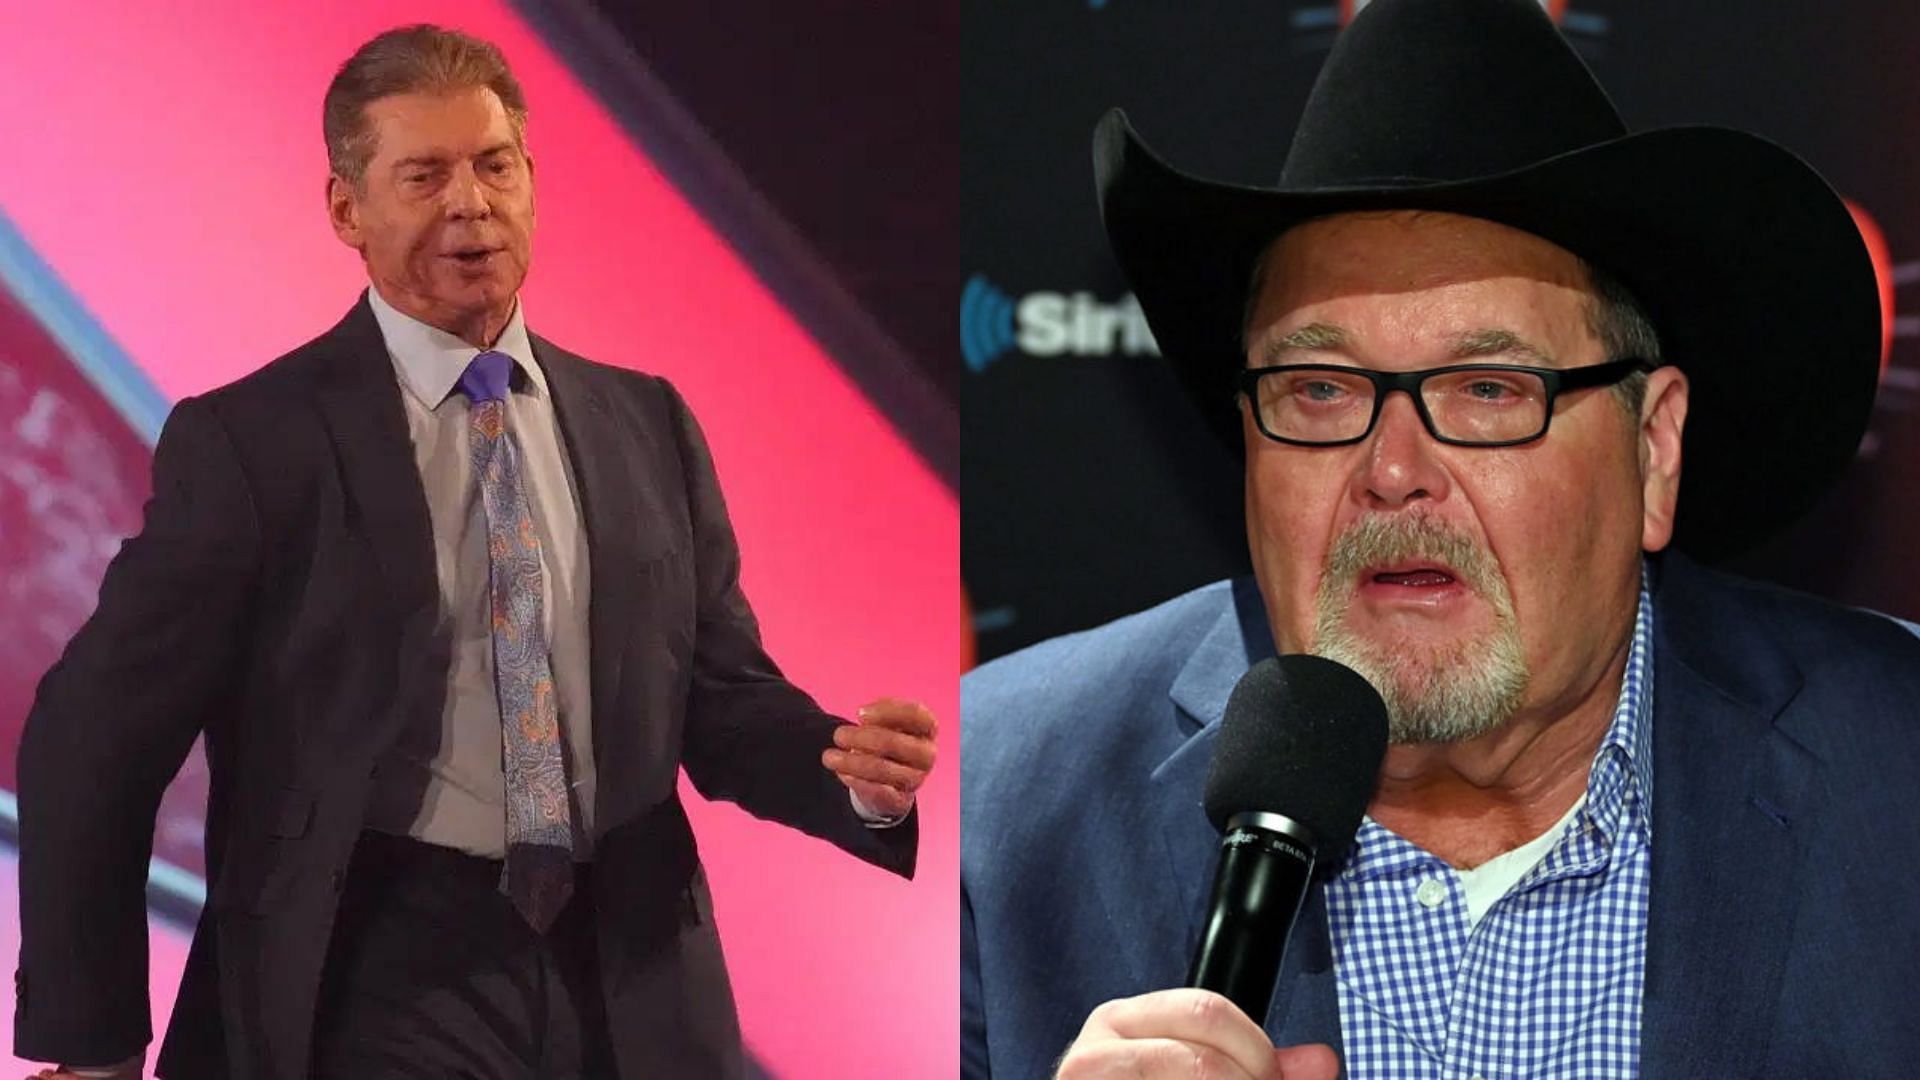 Jim Ross and Vince McMahon once worked with each other in WWE